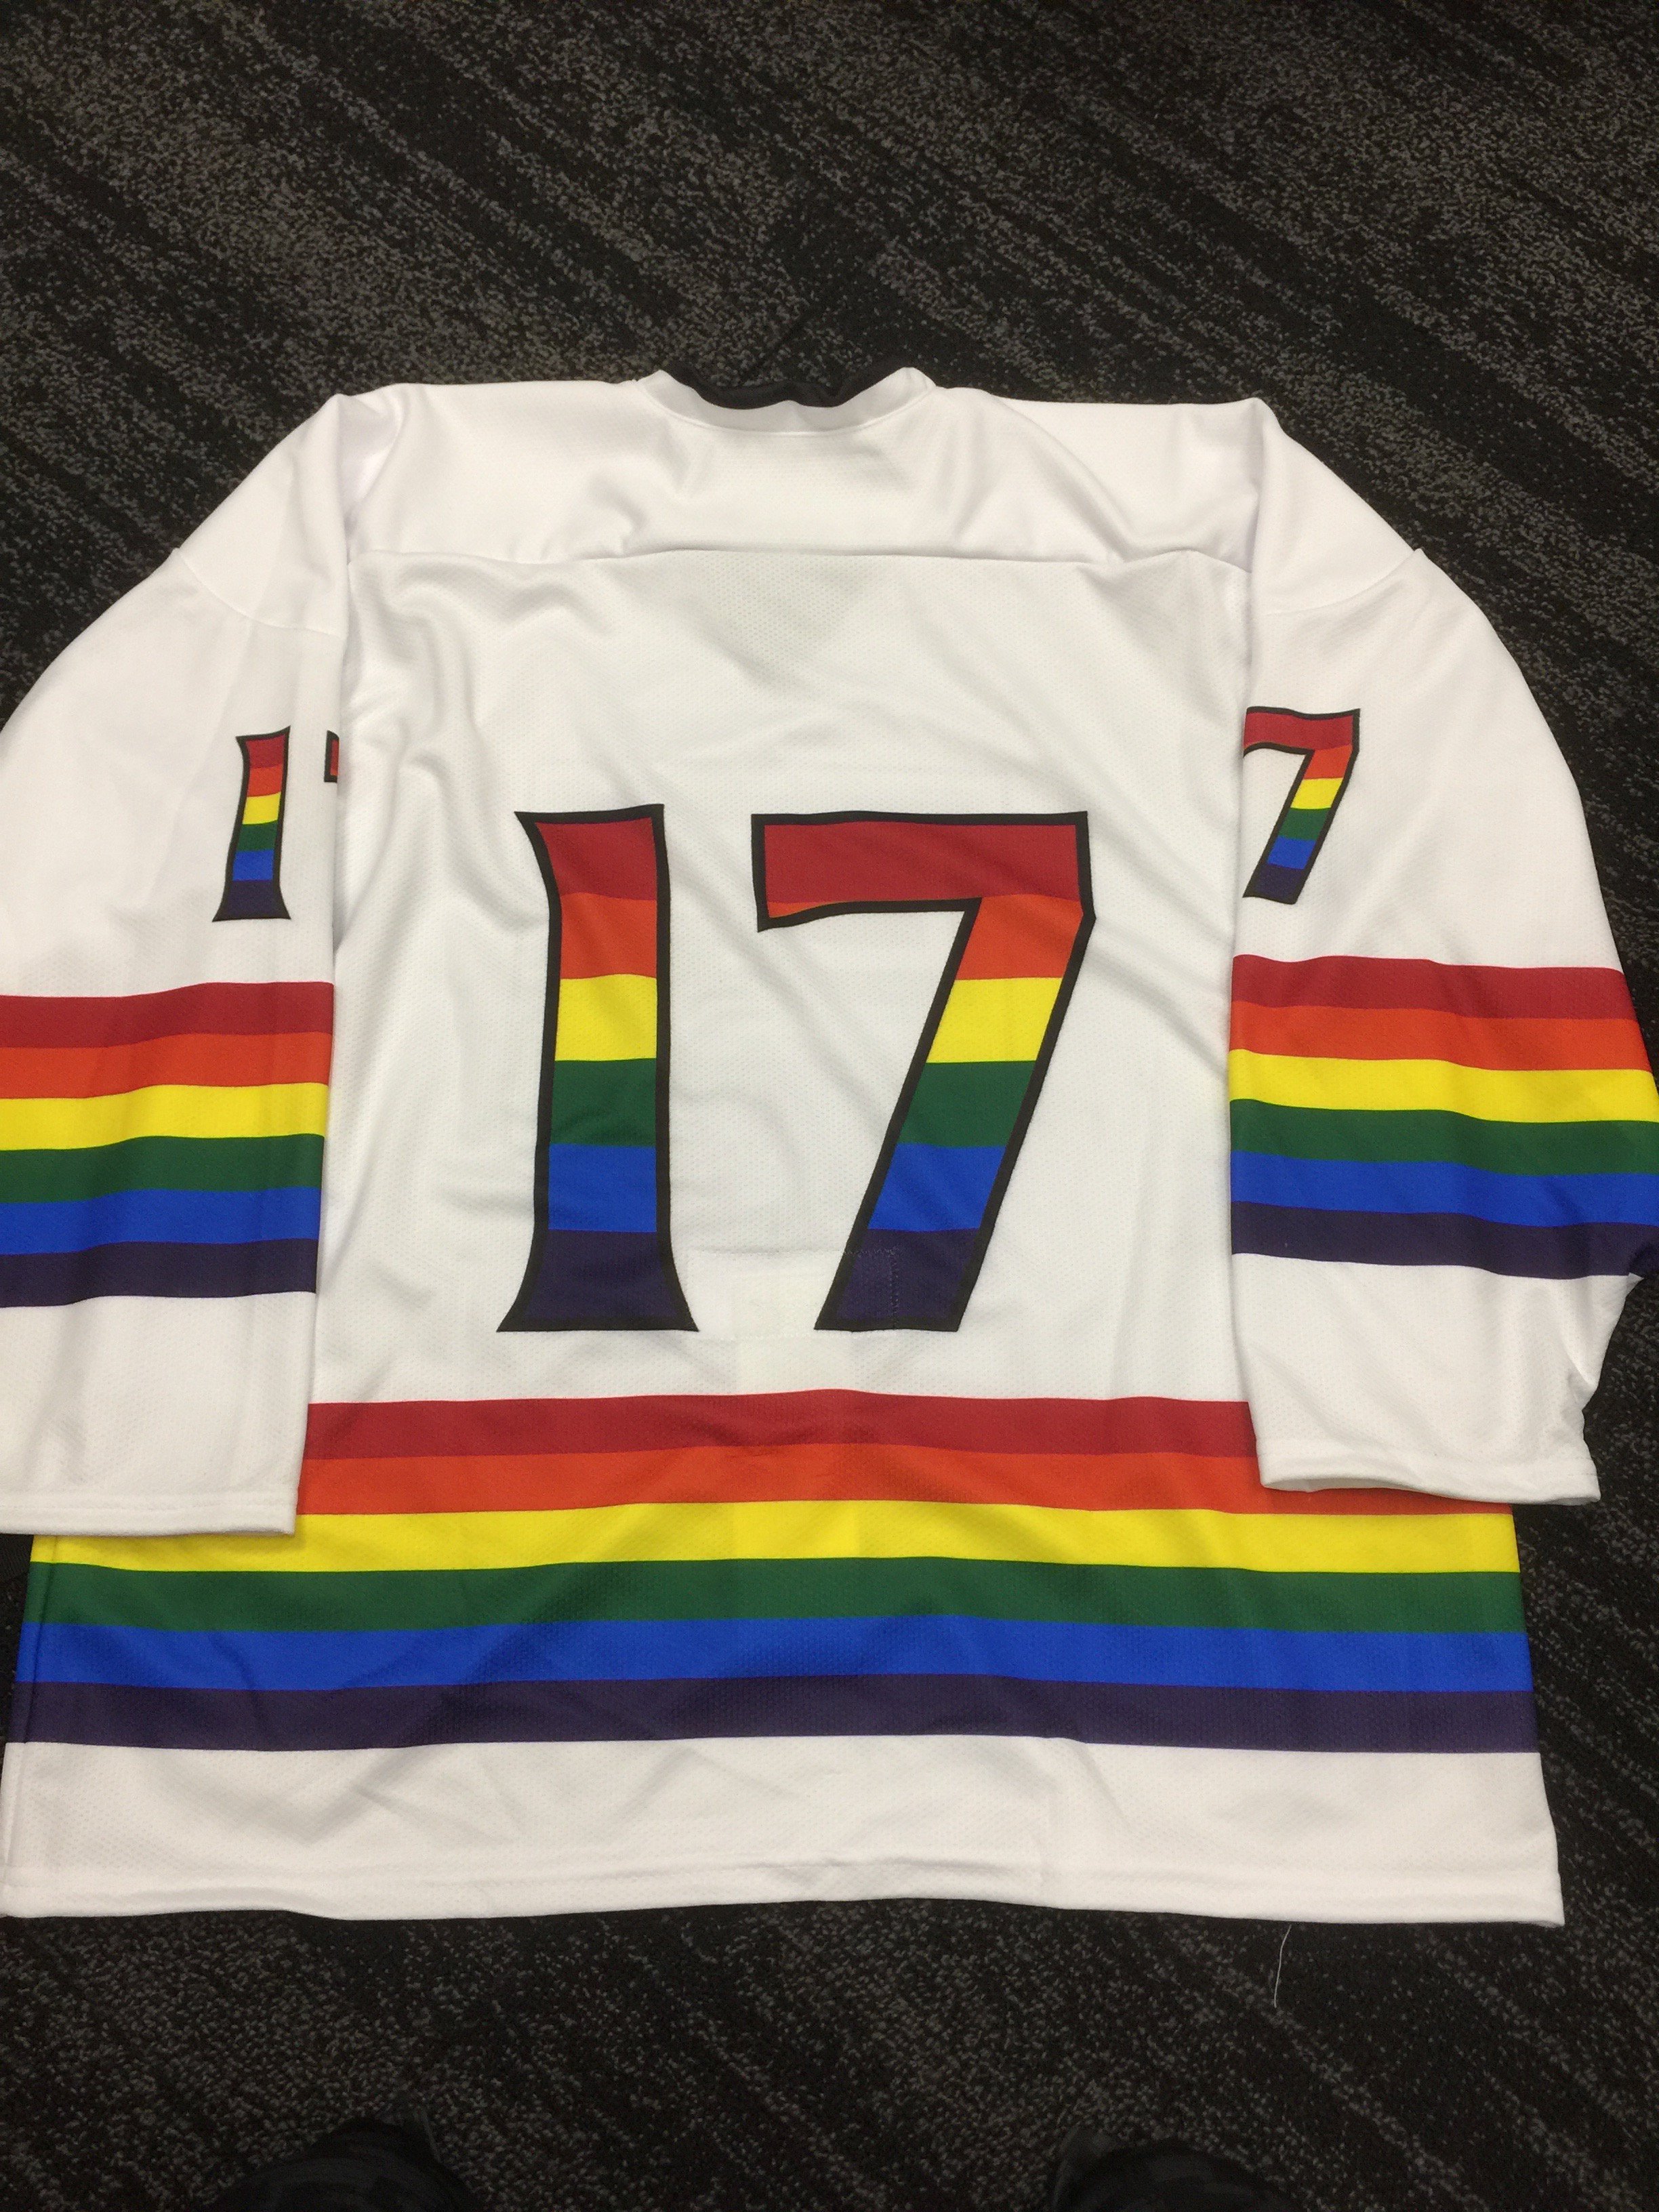 Bailey LA Kings on X: Pride night jersey up for auction. Direct message me  your bid.High bid at the end of the game will win the jersey! size 54 # LAKINGS  /